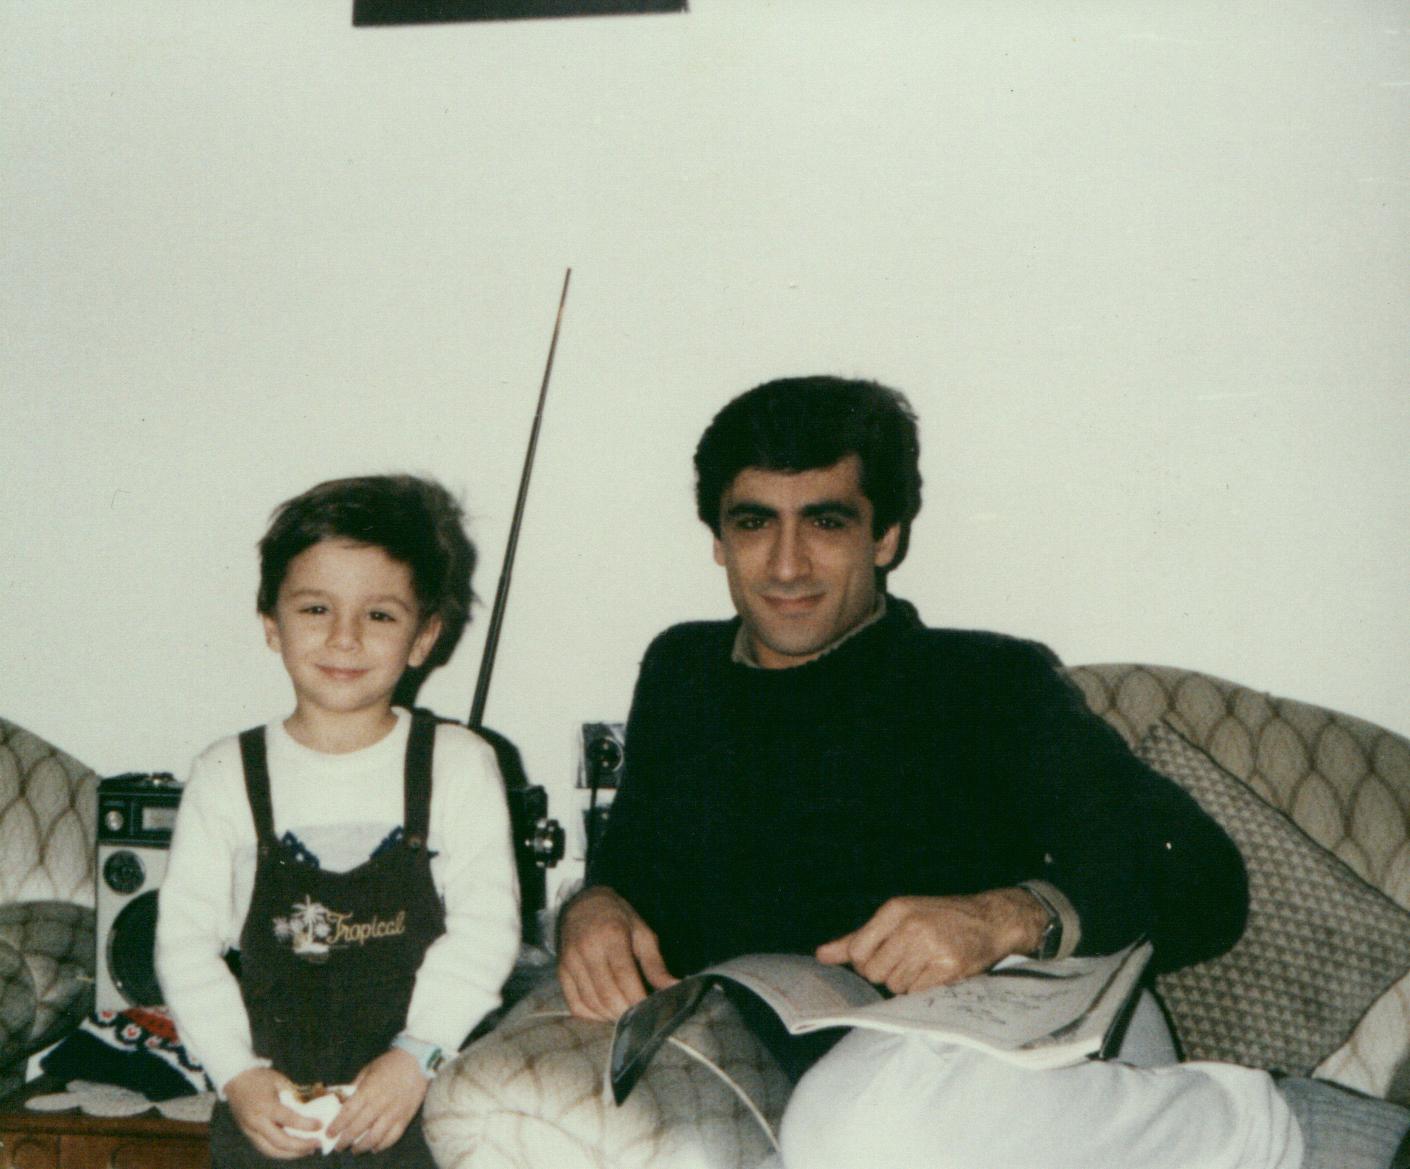 My dad and me in Beirut , Lebanon - February 1988